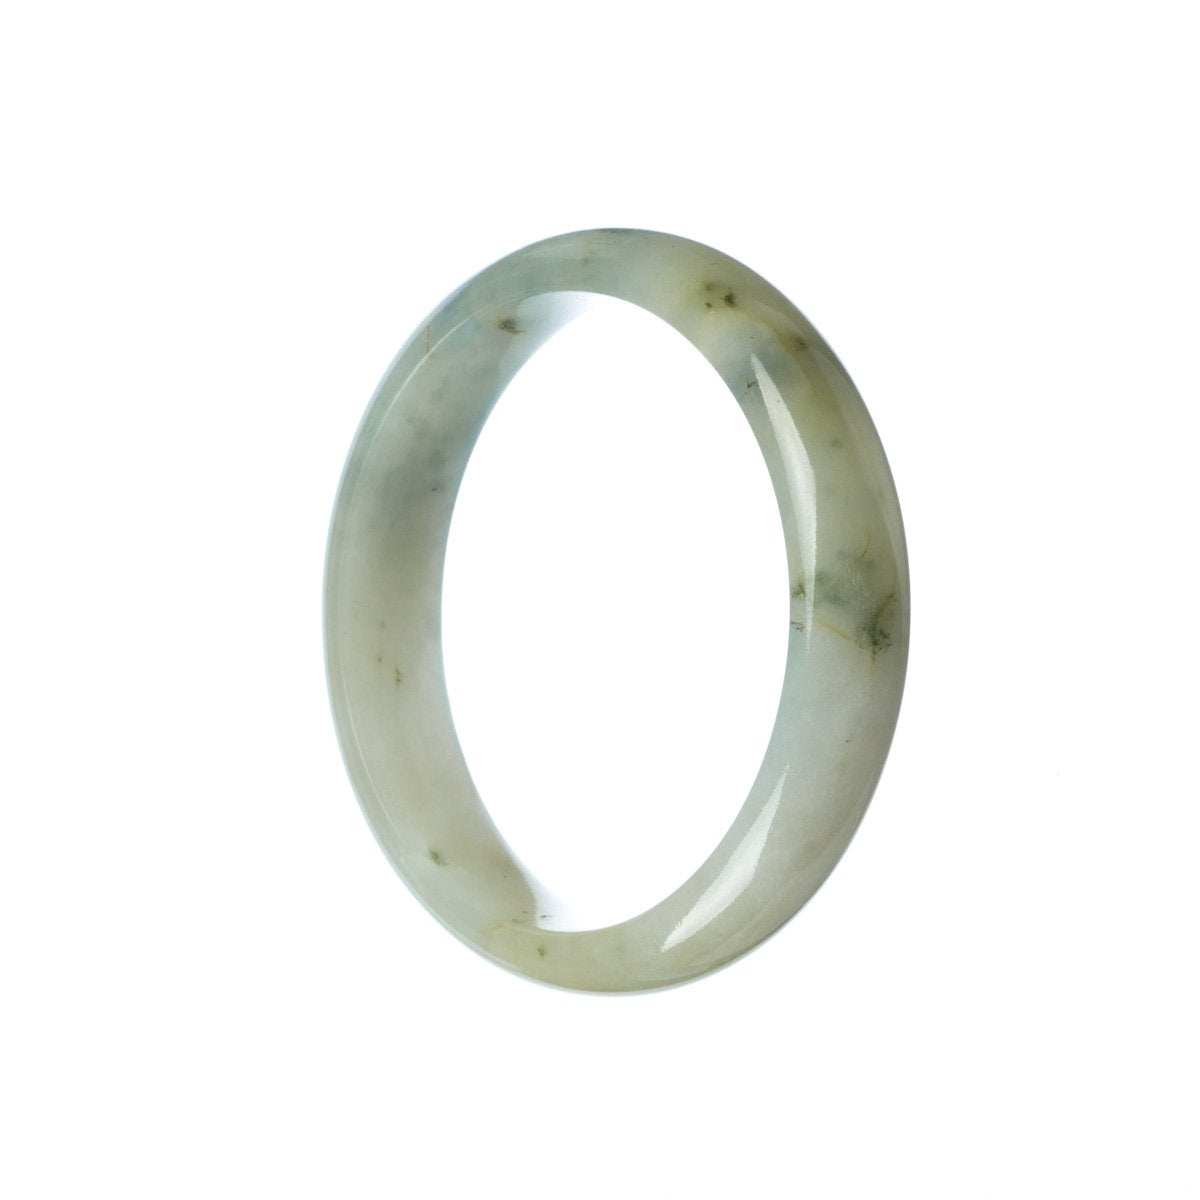 A stunning Grade A White Burma Jade Bangle Bracelet, featuring a 55mm Half Moon design. Handcrafted and authentic, this bracelet from MAYS is a true gem.